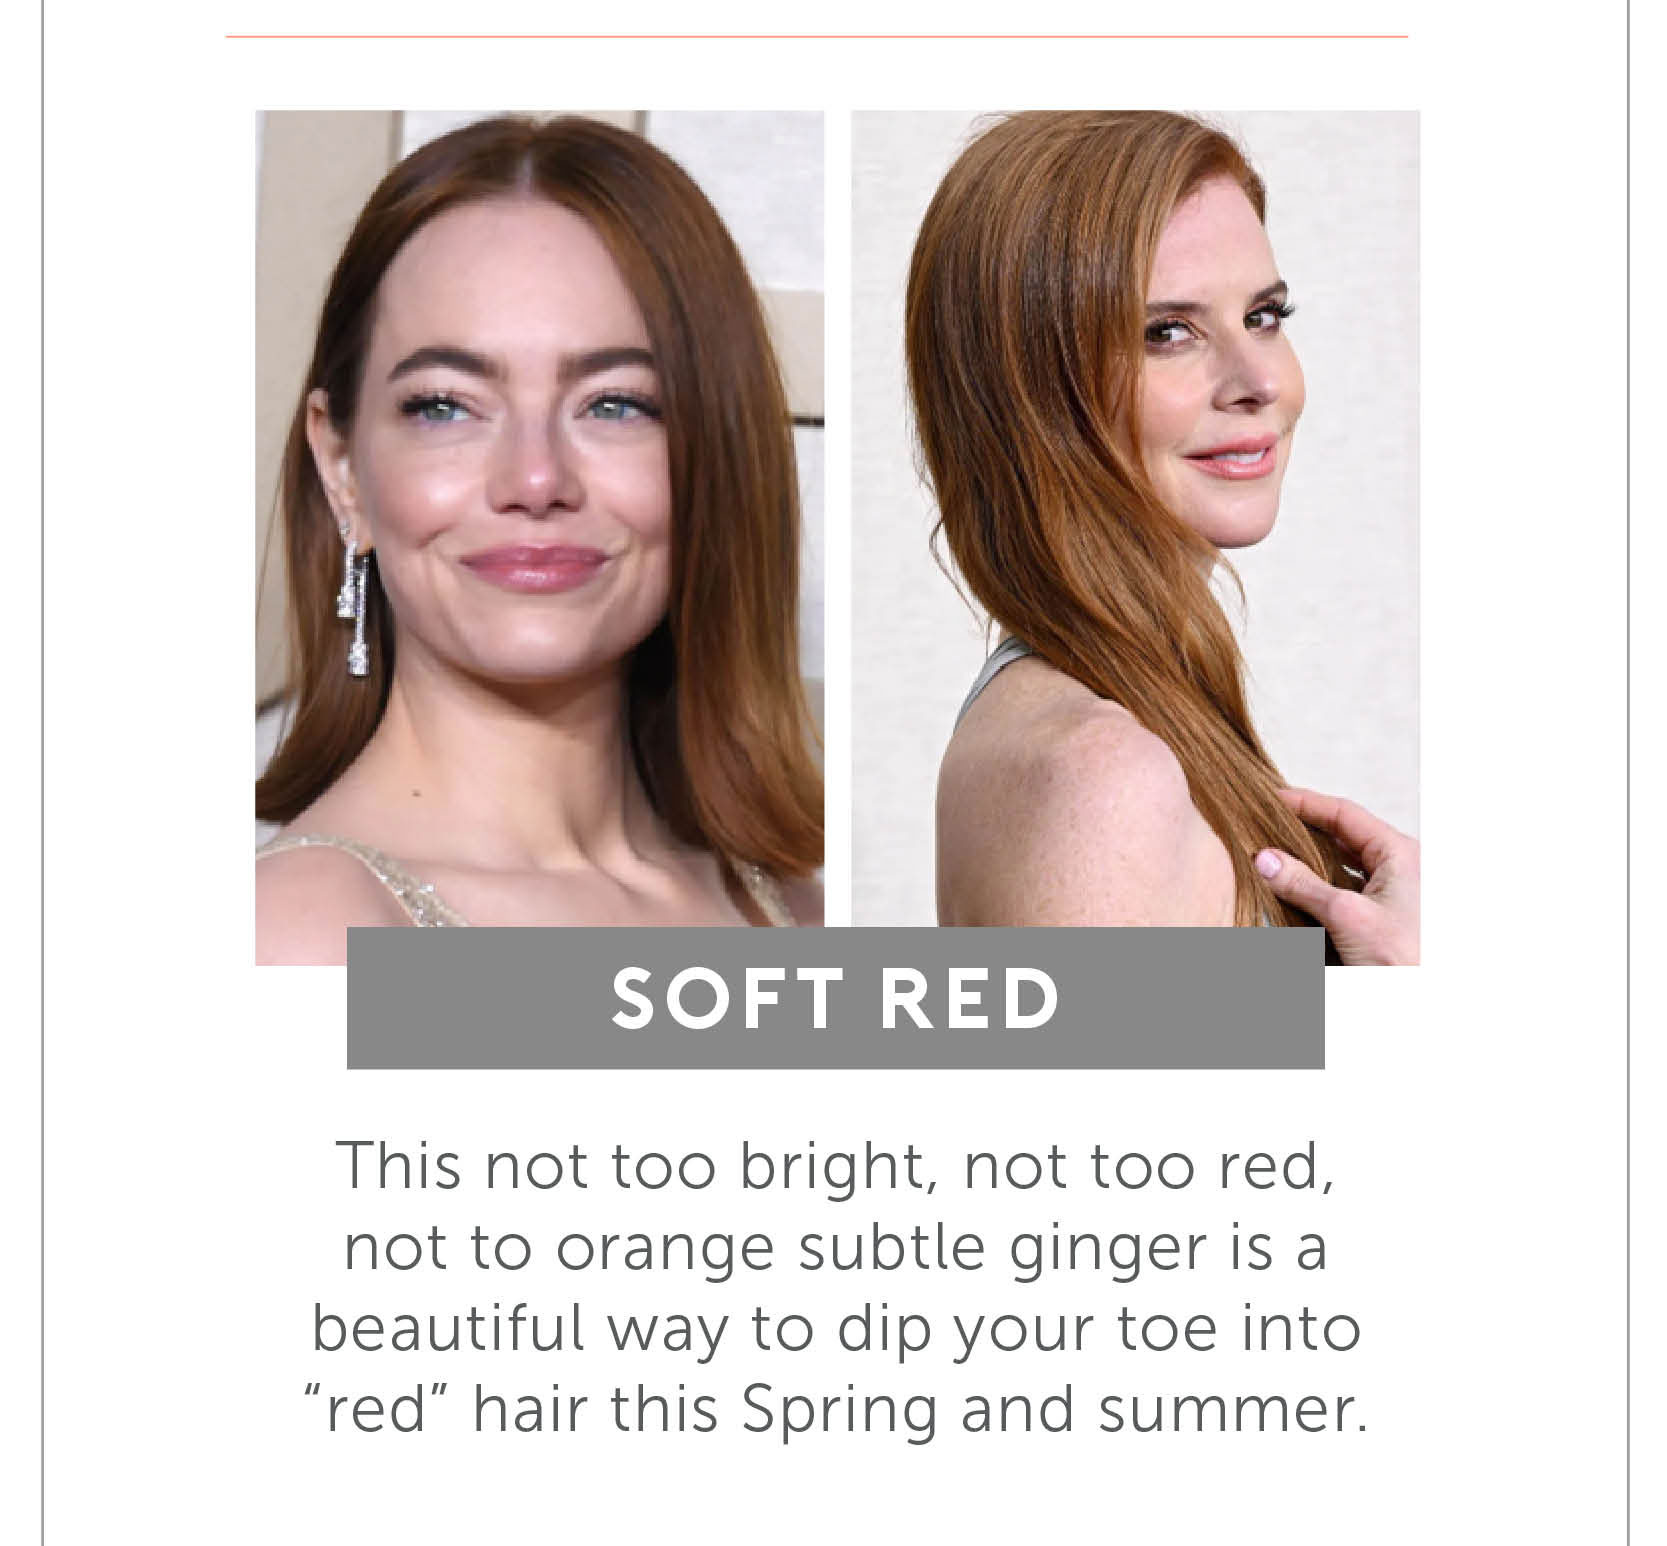 Soft Red - This not too bright, not too red, not to orange subtle ginger is a beautiful way to dip your toe into “red” hair this Spring and summer.